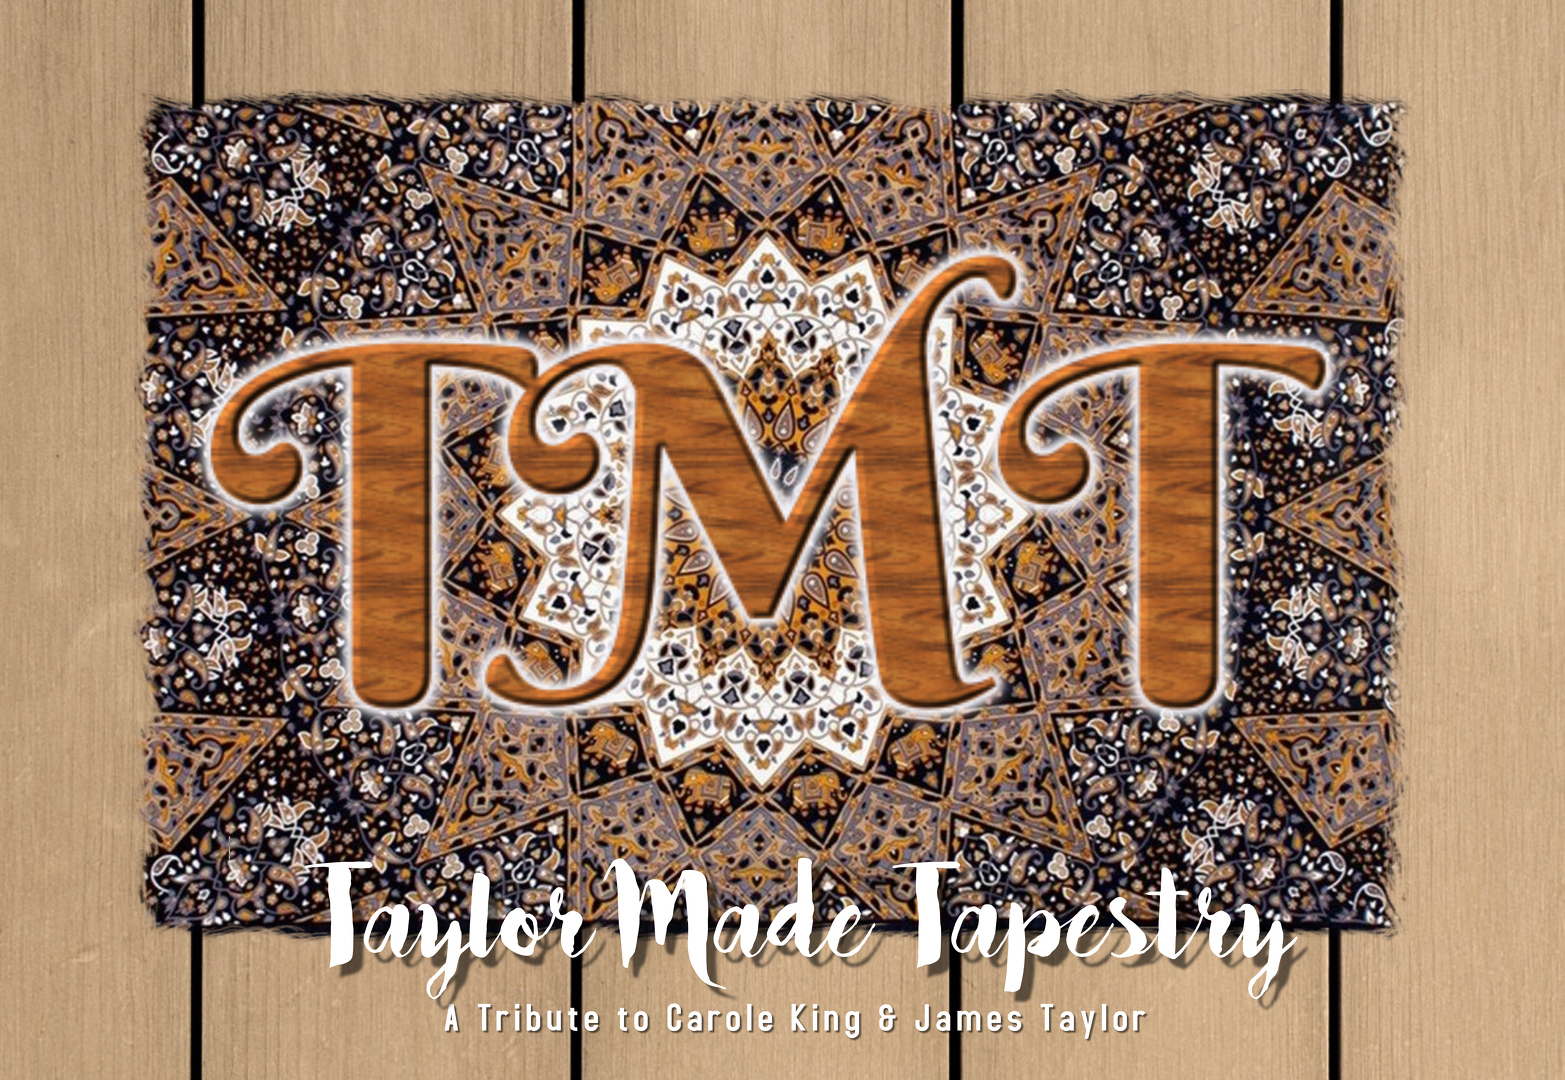 Add Taylor Made Tapestry (A Tribute to Carole King & James Taylor)